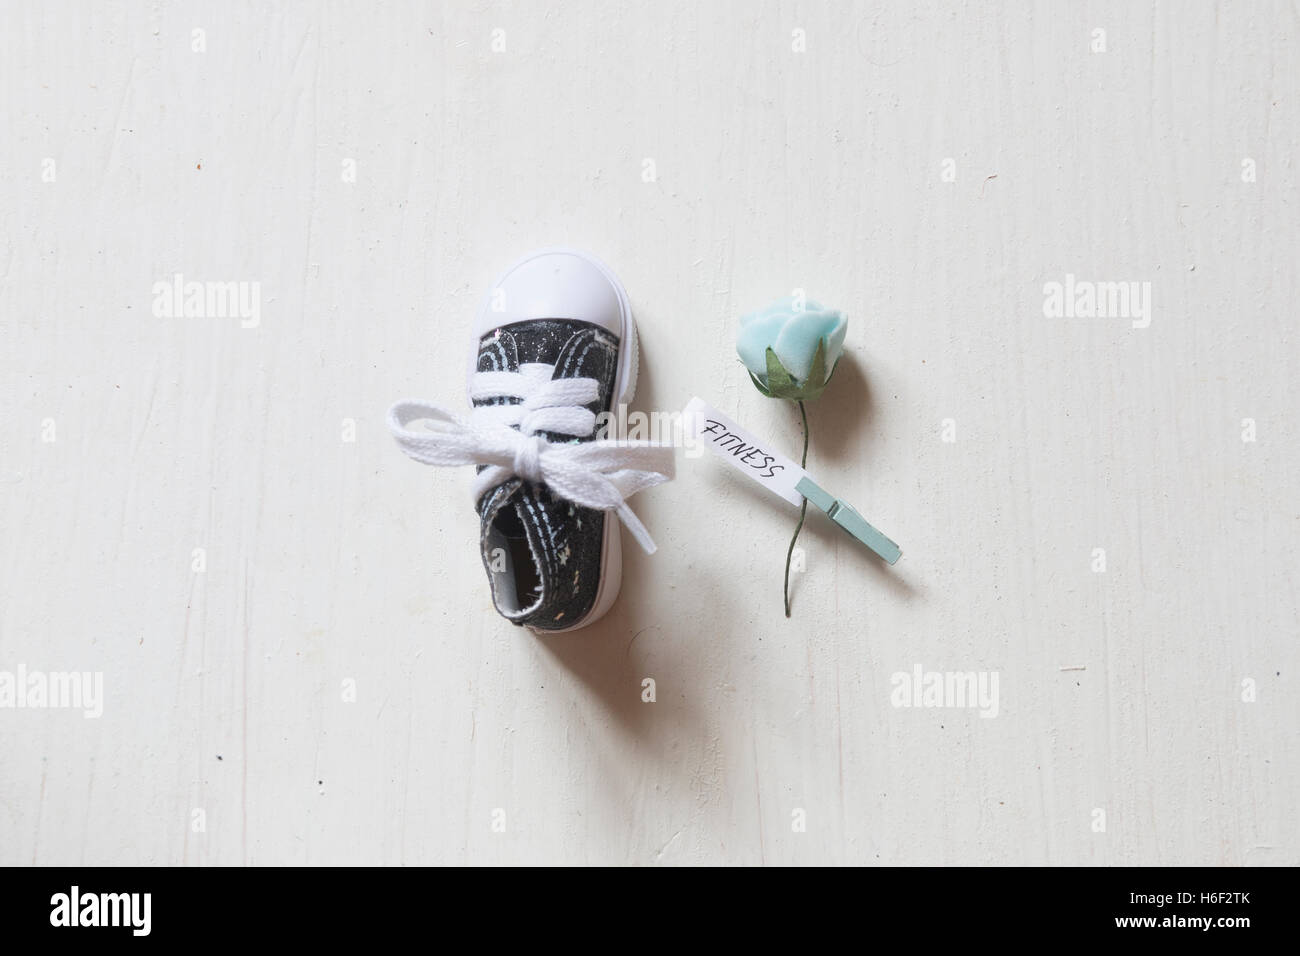 fitness training concept, flower with text and one shoe. Stock Photo